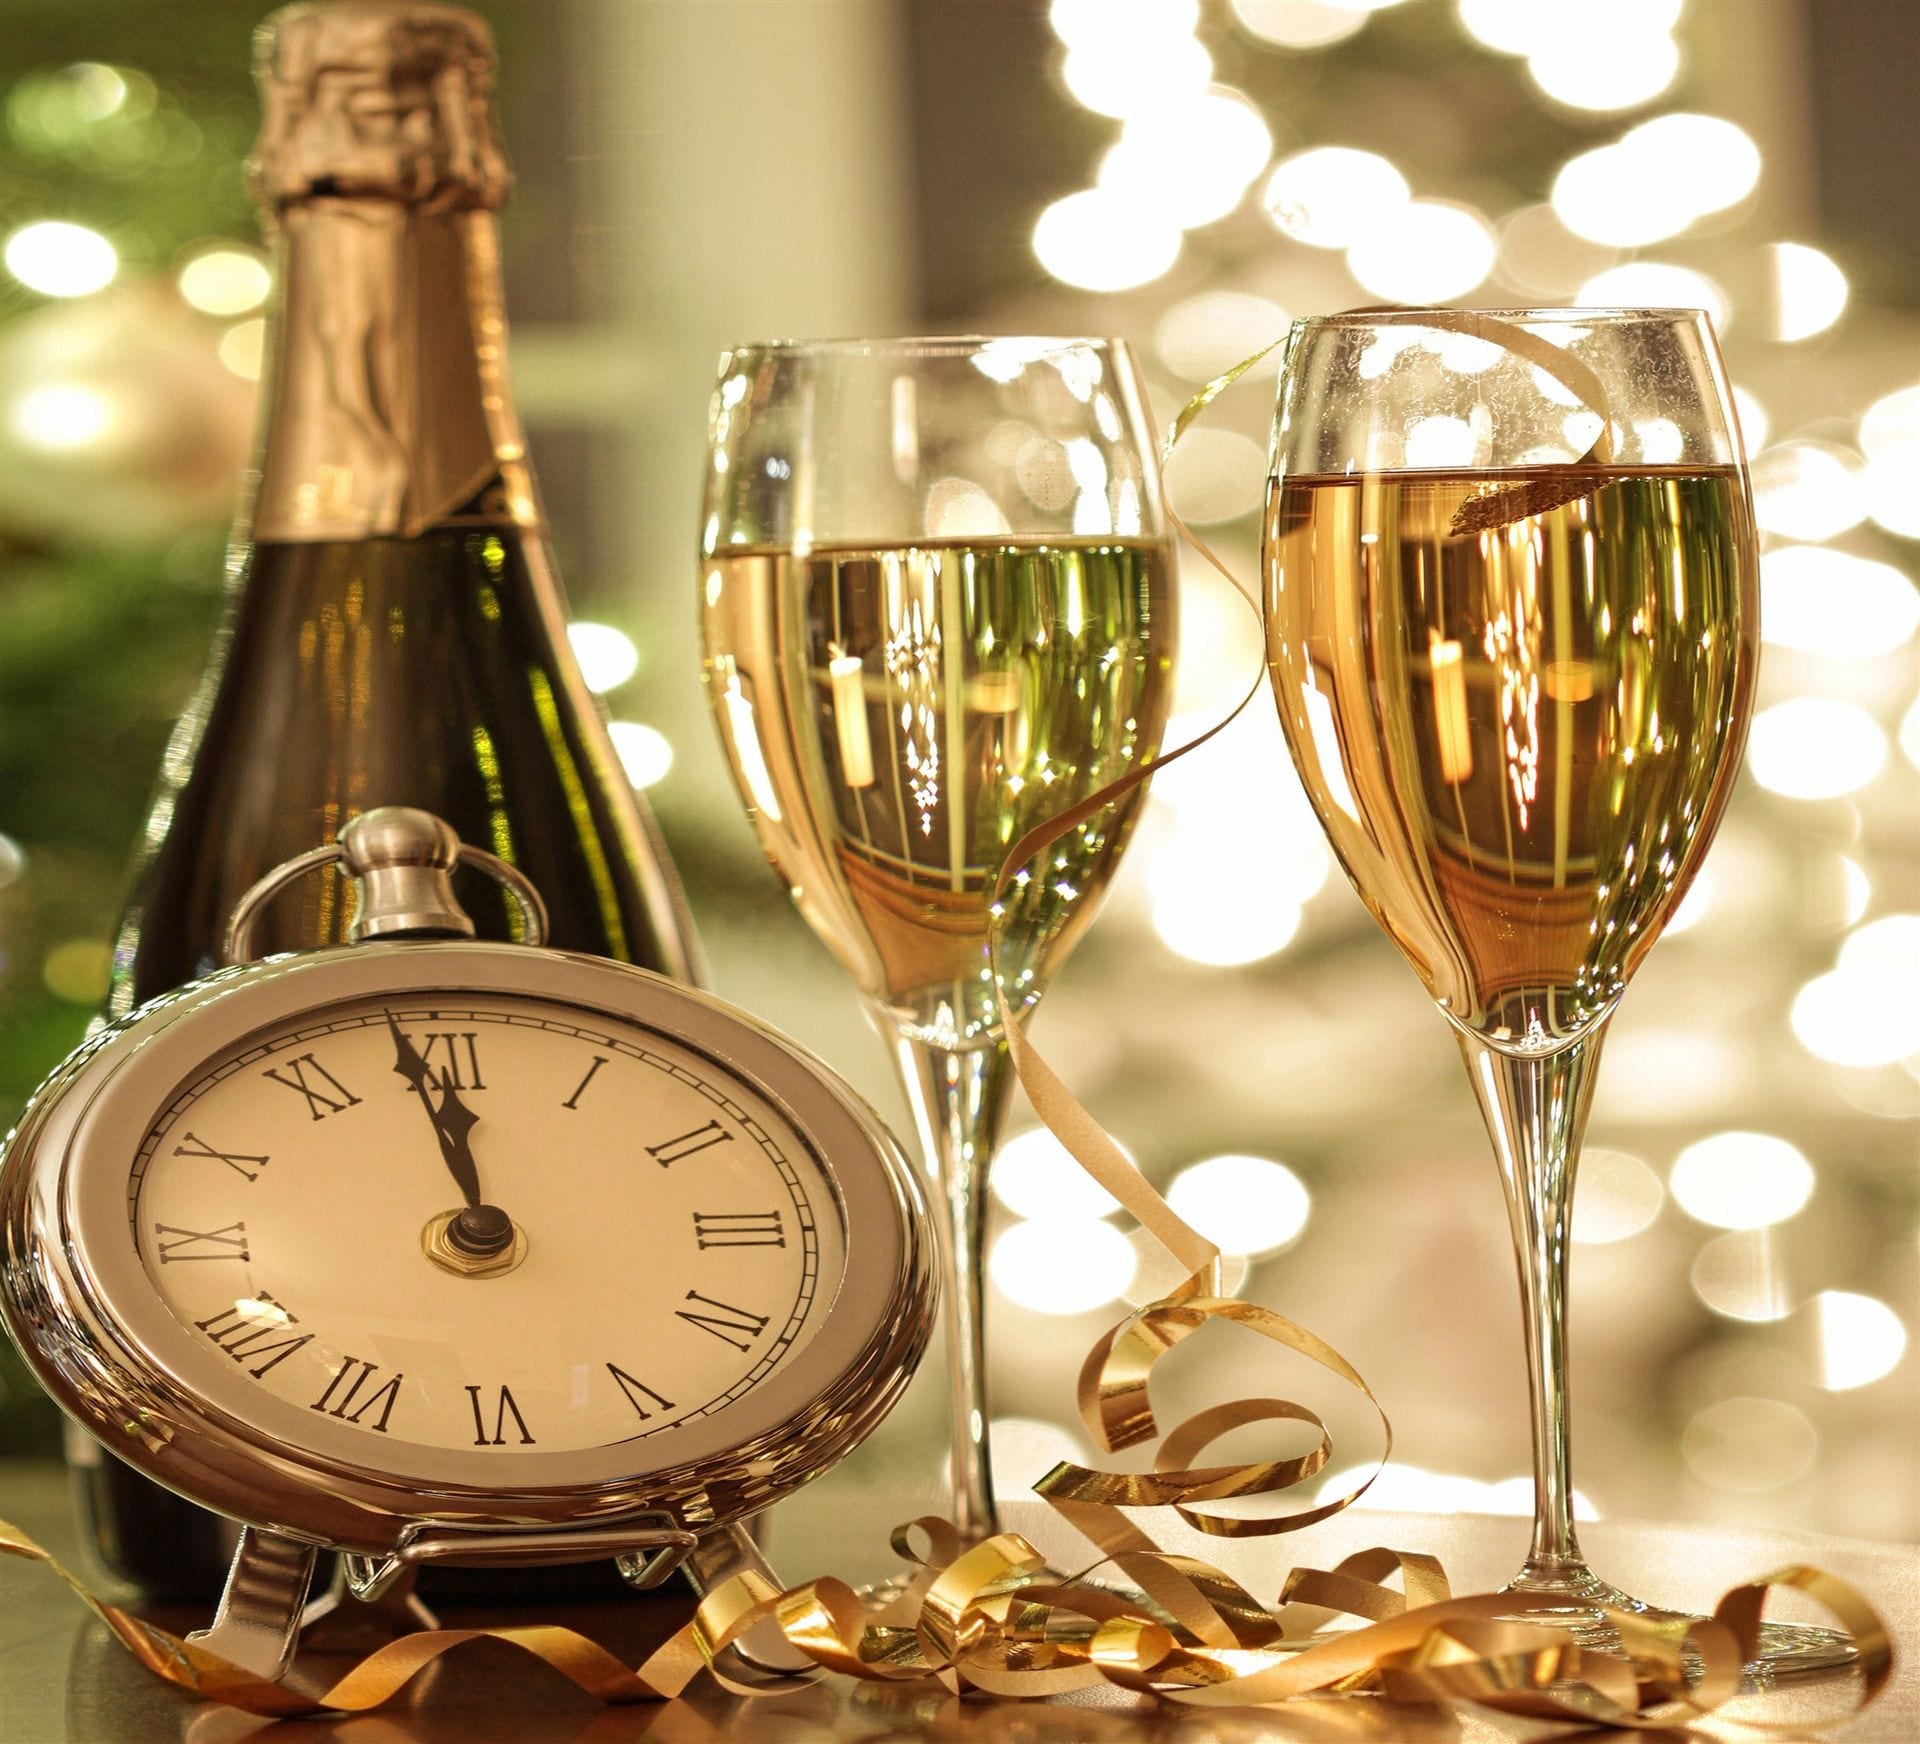 Champagne glasses, gold ribbons, and clock nearing midnight